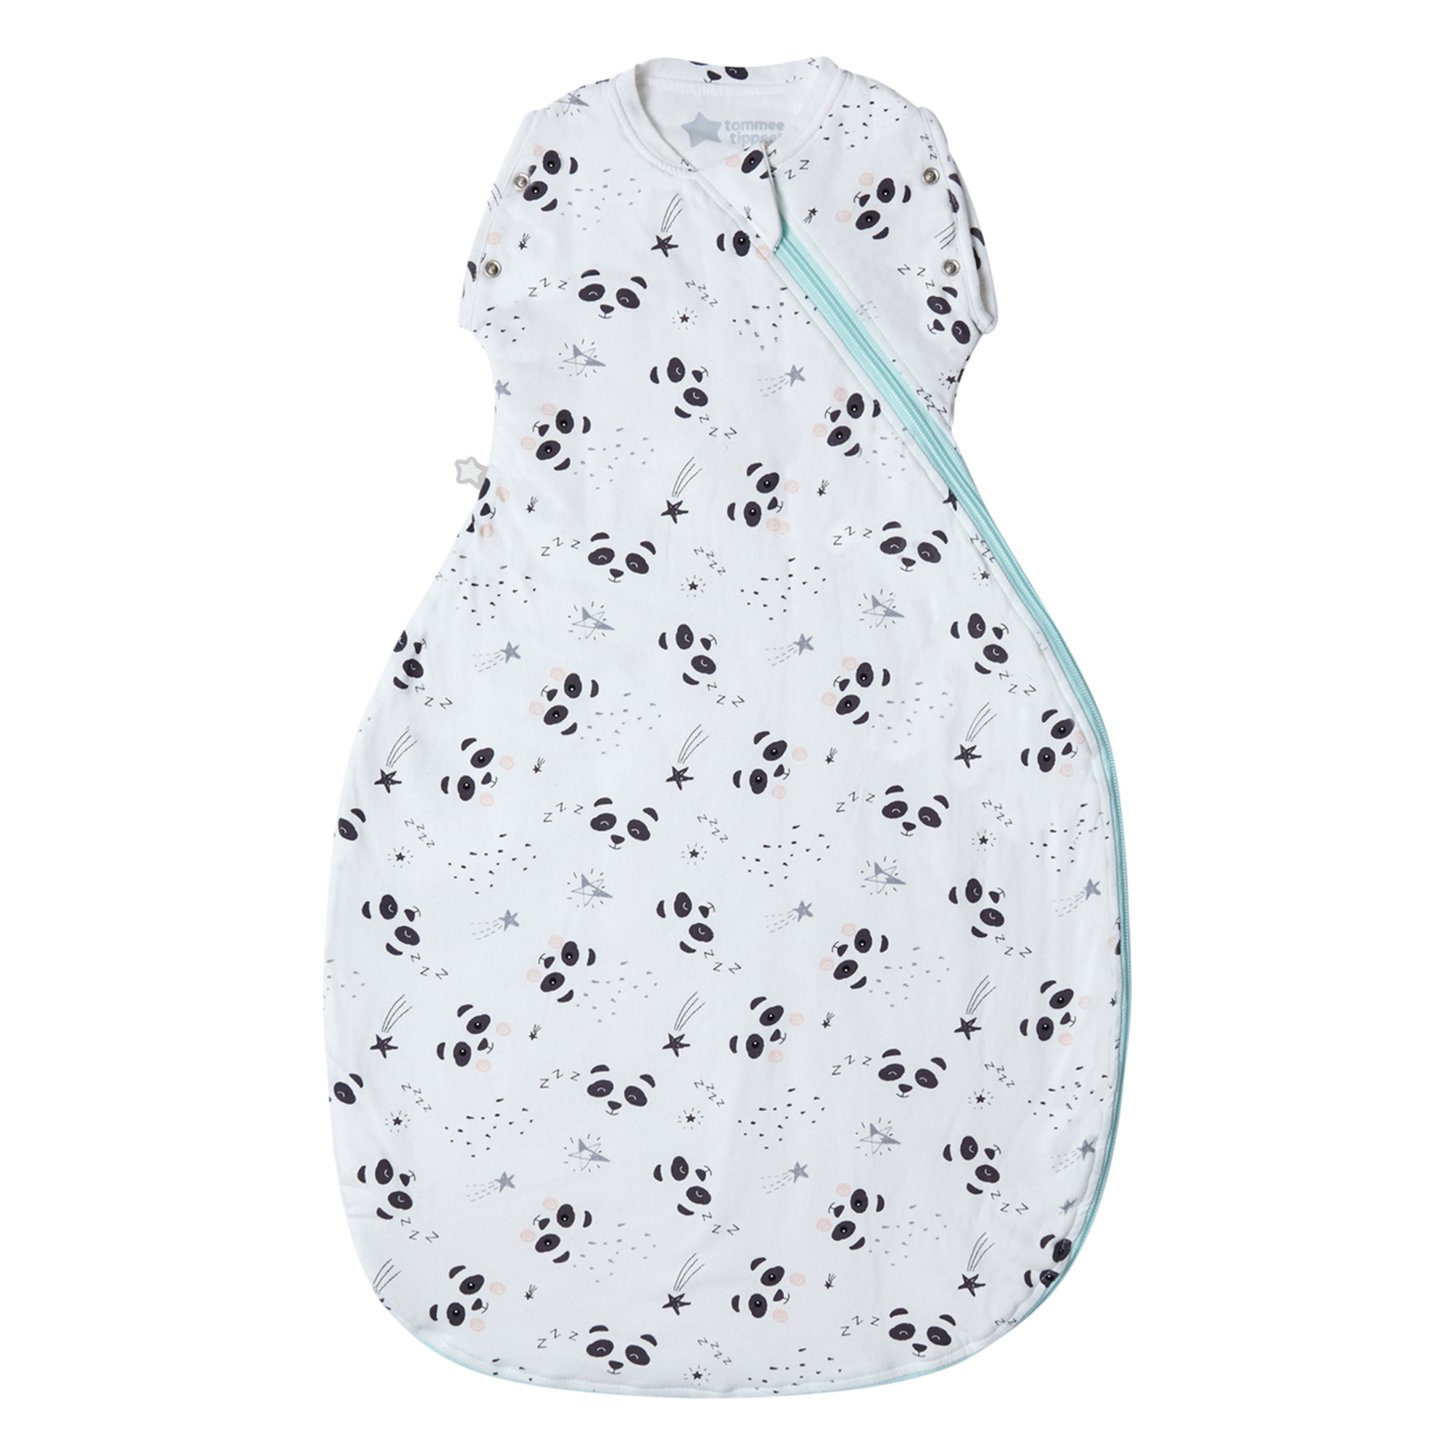 Tommee Tippee Newborn Snuggle, 3-9m, 1.0 Tog, Little Pip Review